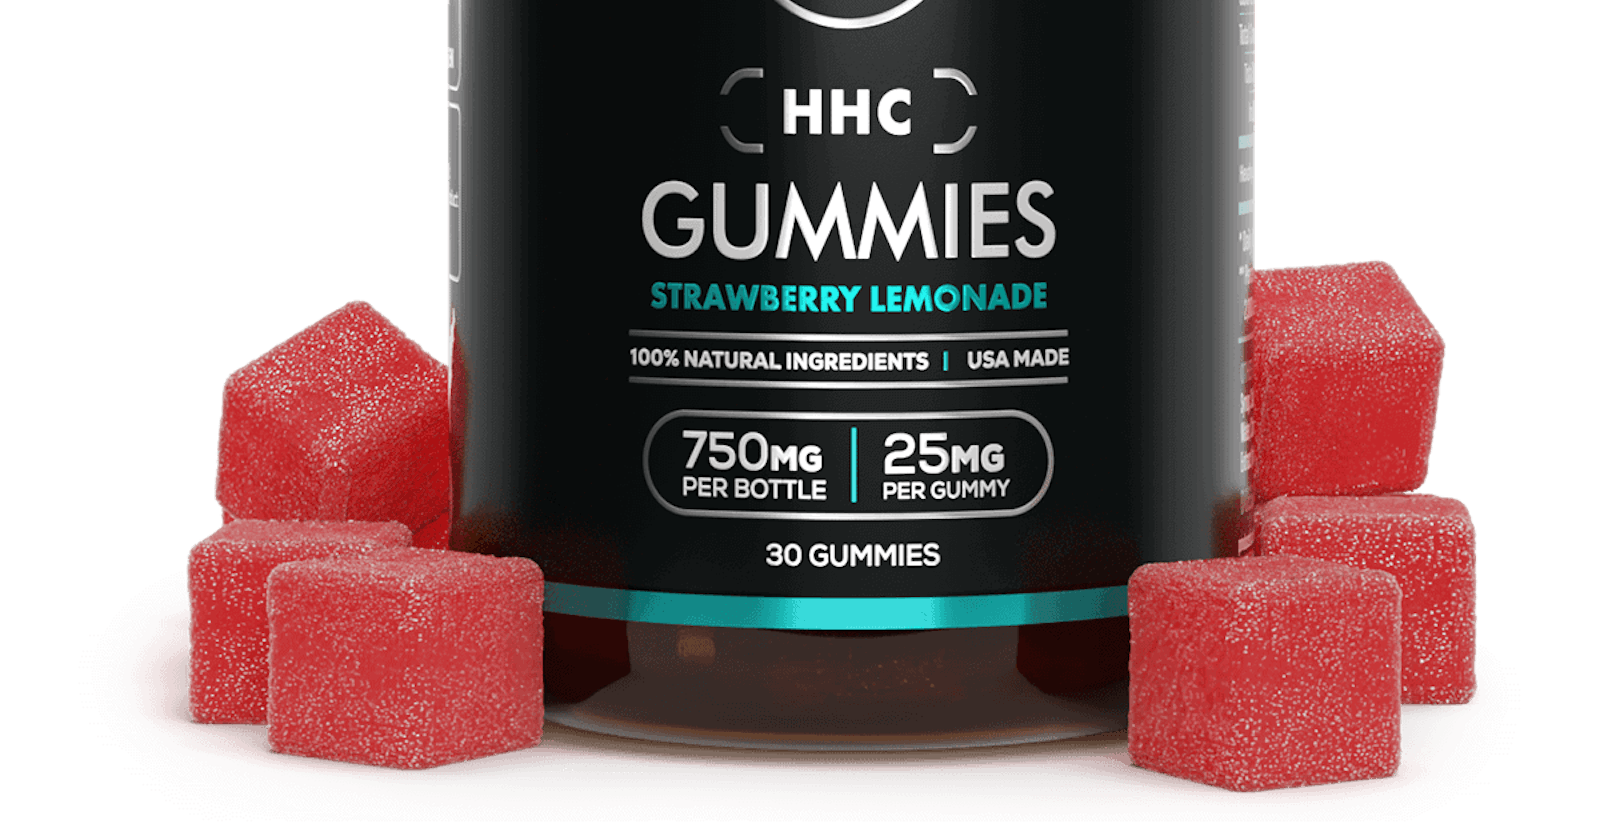 Elevate CBD Gummies Review: Scam or Legit? Serious Side Effects Risk?